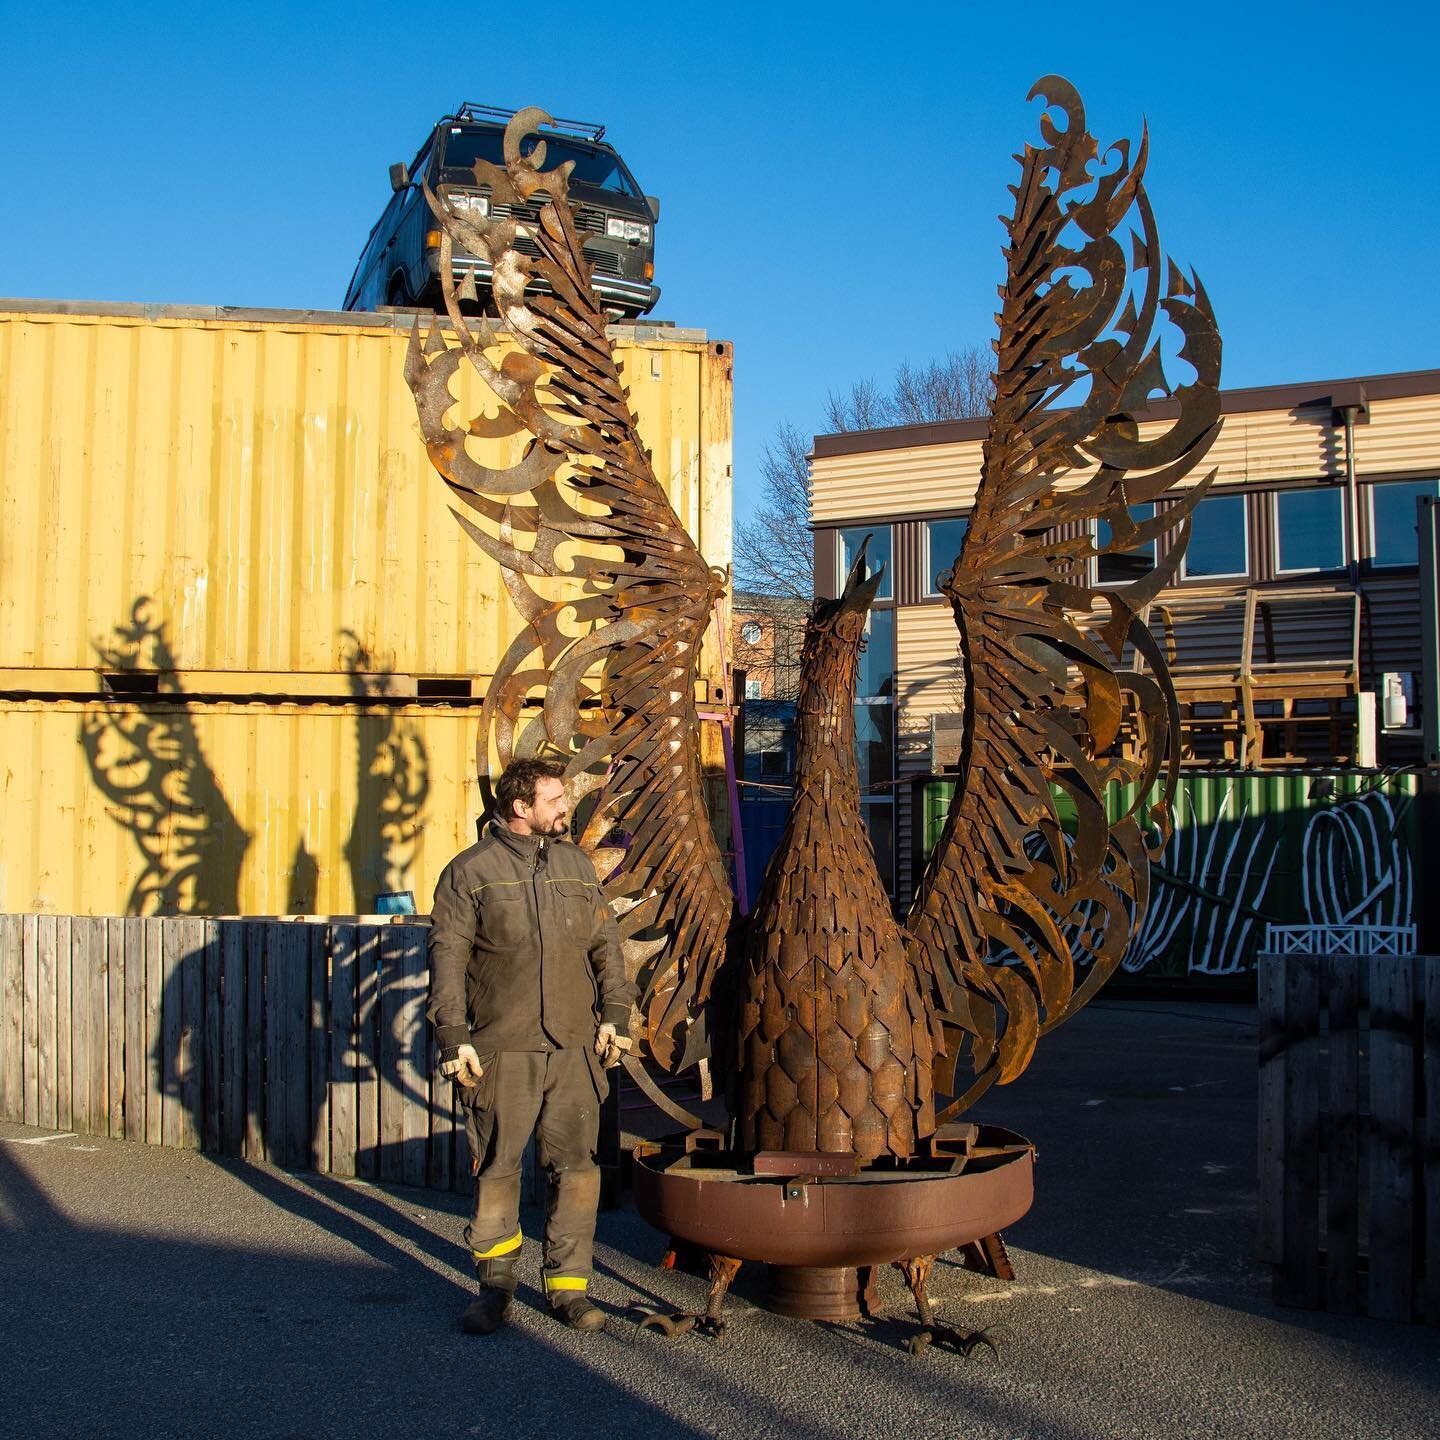 Introducing #Frihamnstorget &lsquo;s Phoenix - constructed from entirely cutoffs of previous projects. The belly opens to house a flame thrower (naturally). Come by and check it out! 
.
.
.
#welding #art #publicart #phoenix #frihamnstorget #blivande 